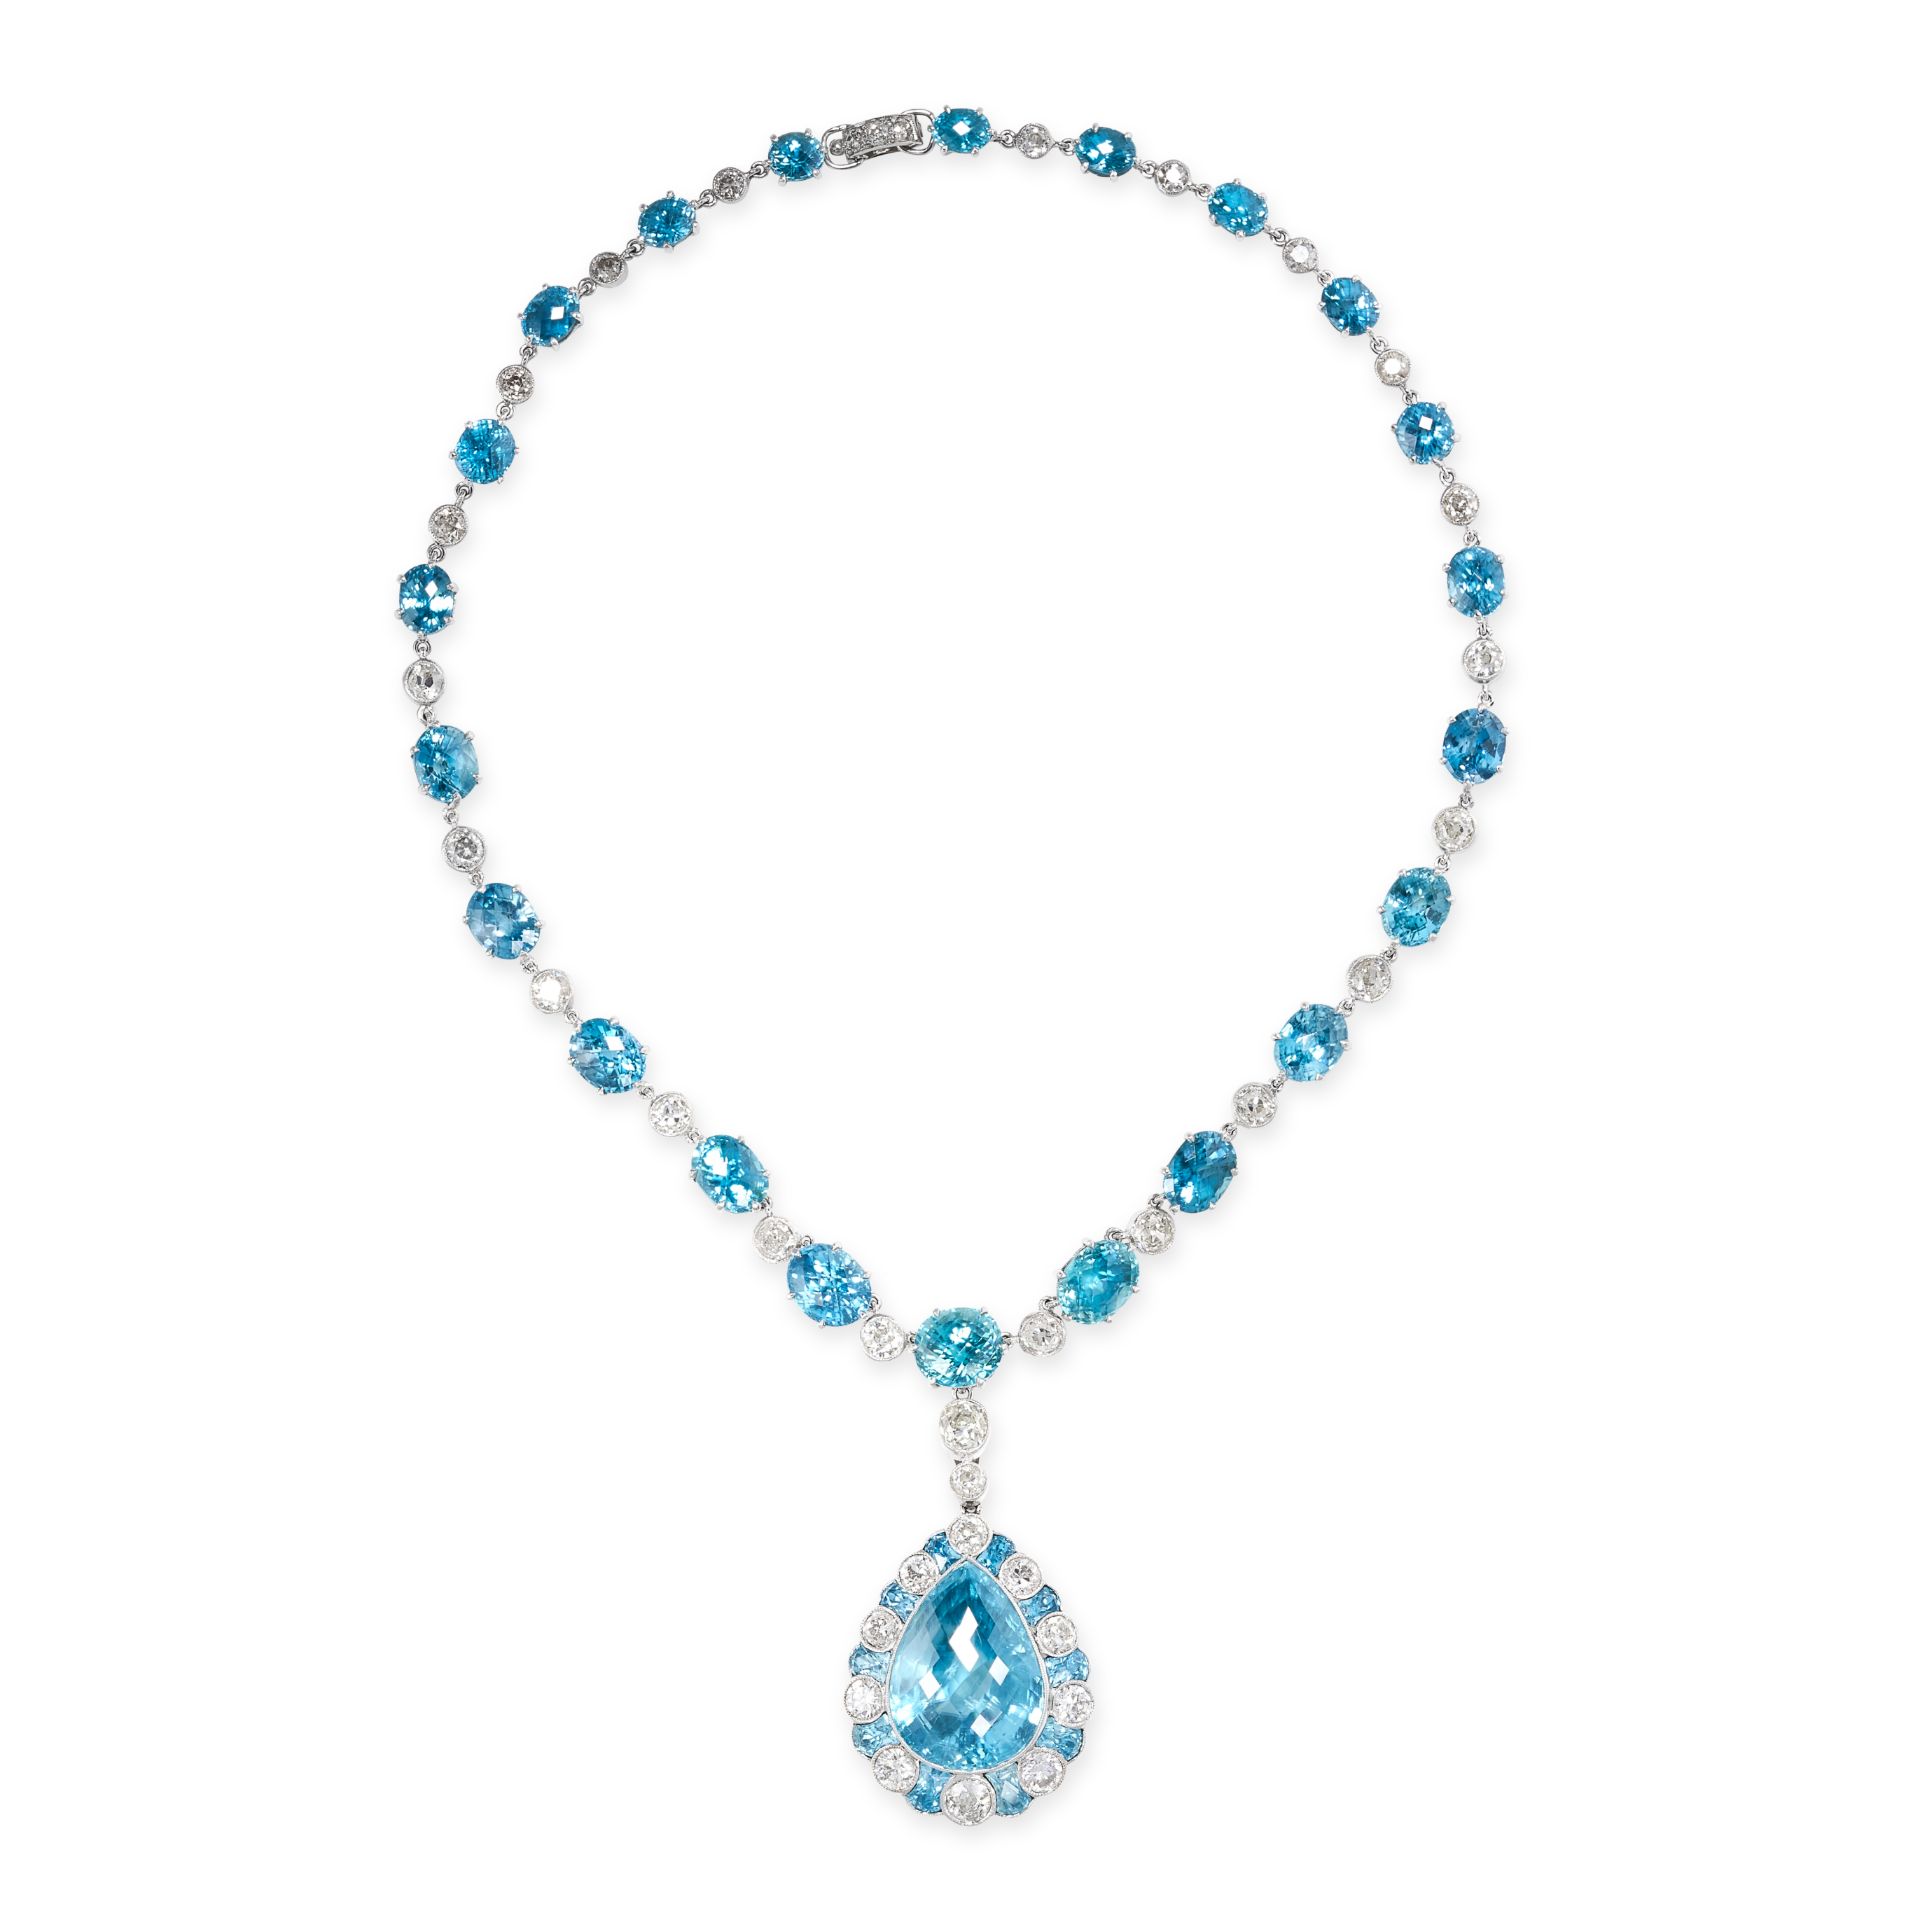 A BLUE ZIRCON AND DIAMOND PENDANT NECKLACE in 18ct white gold, the pendant set with a fancy pear cut